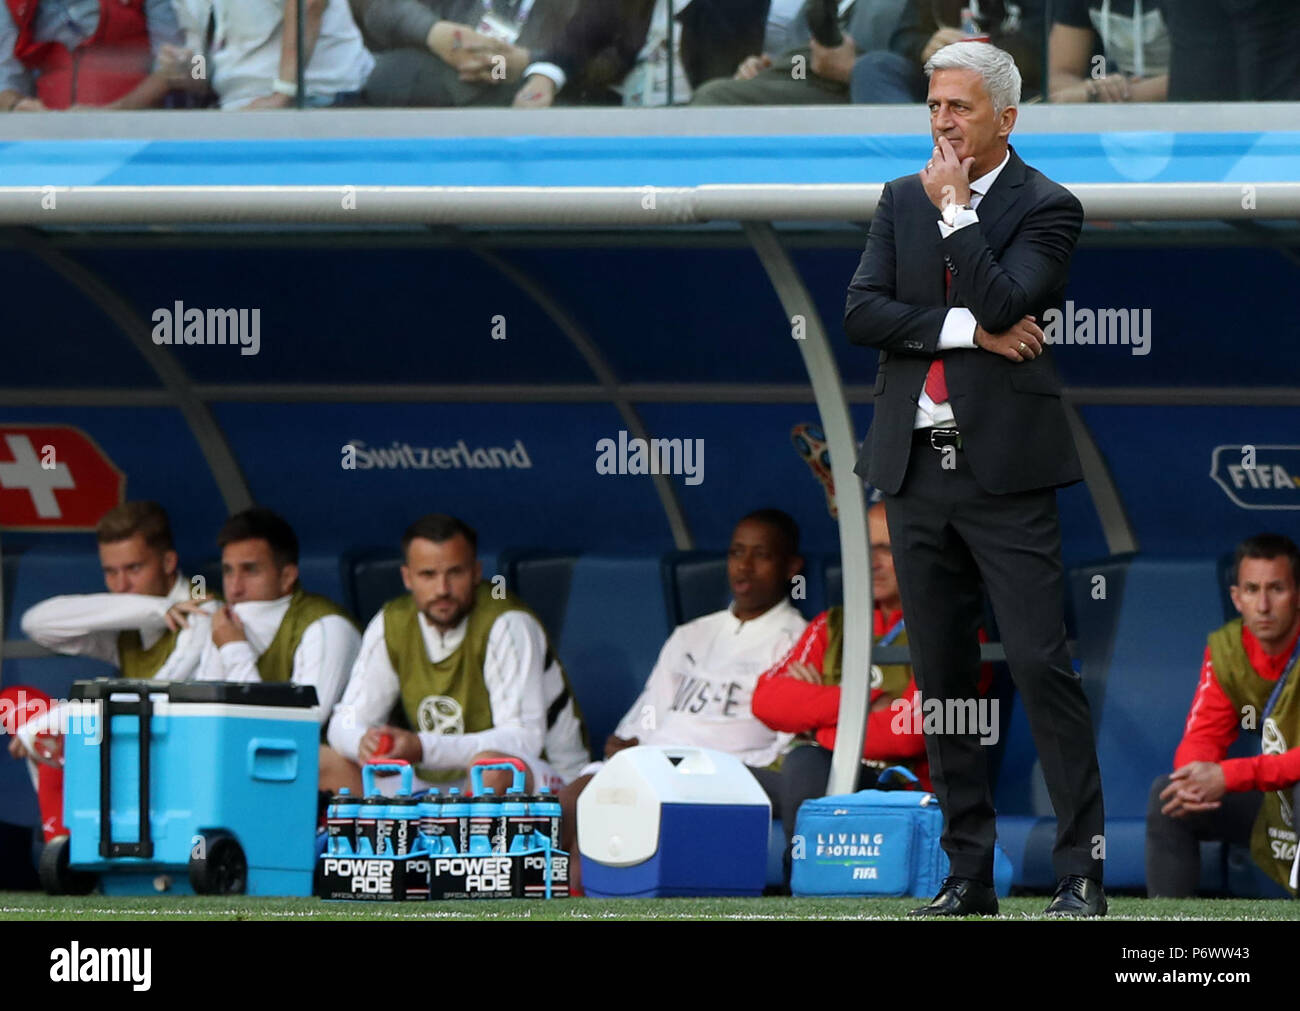 Saint Petersburg, Russia. 3rd July, 2018. Head coach Vladimir Petkovic of Switzerland is seen during the 2018 FIFA World Cup round of 16 match between Switzerland and Sweden in Saint Petersburg, Russia, July 3, 2018. Credit: Wu Zhuang/Xinhua/Alamy Live News Stock Photo